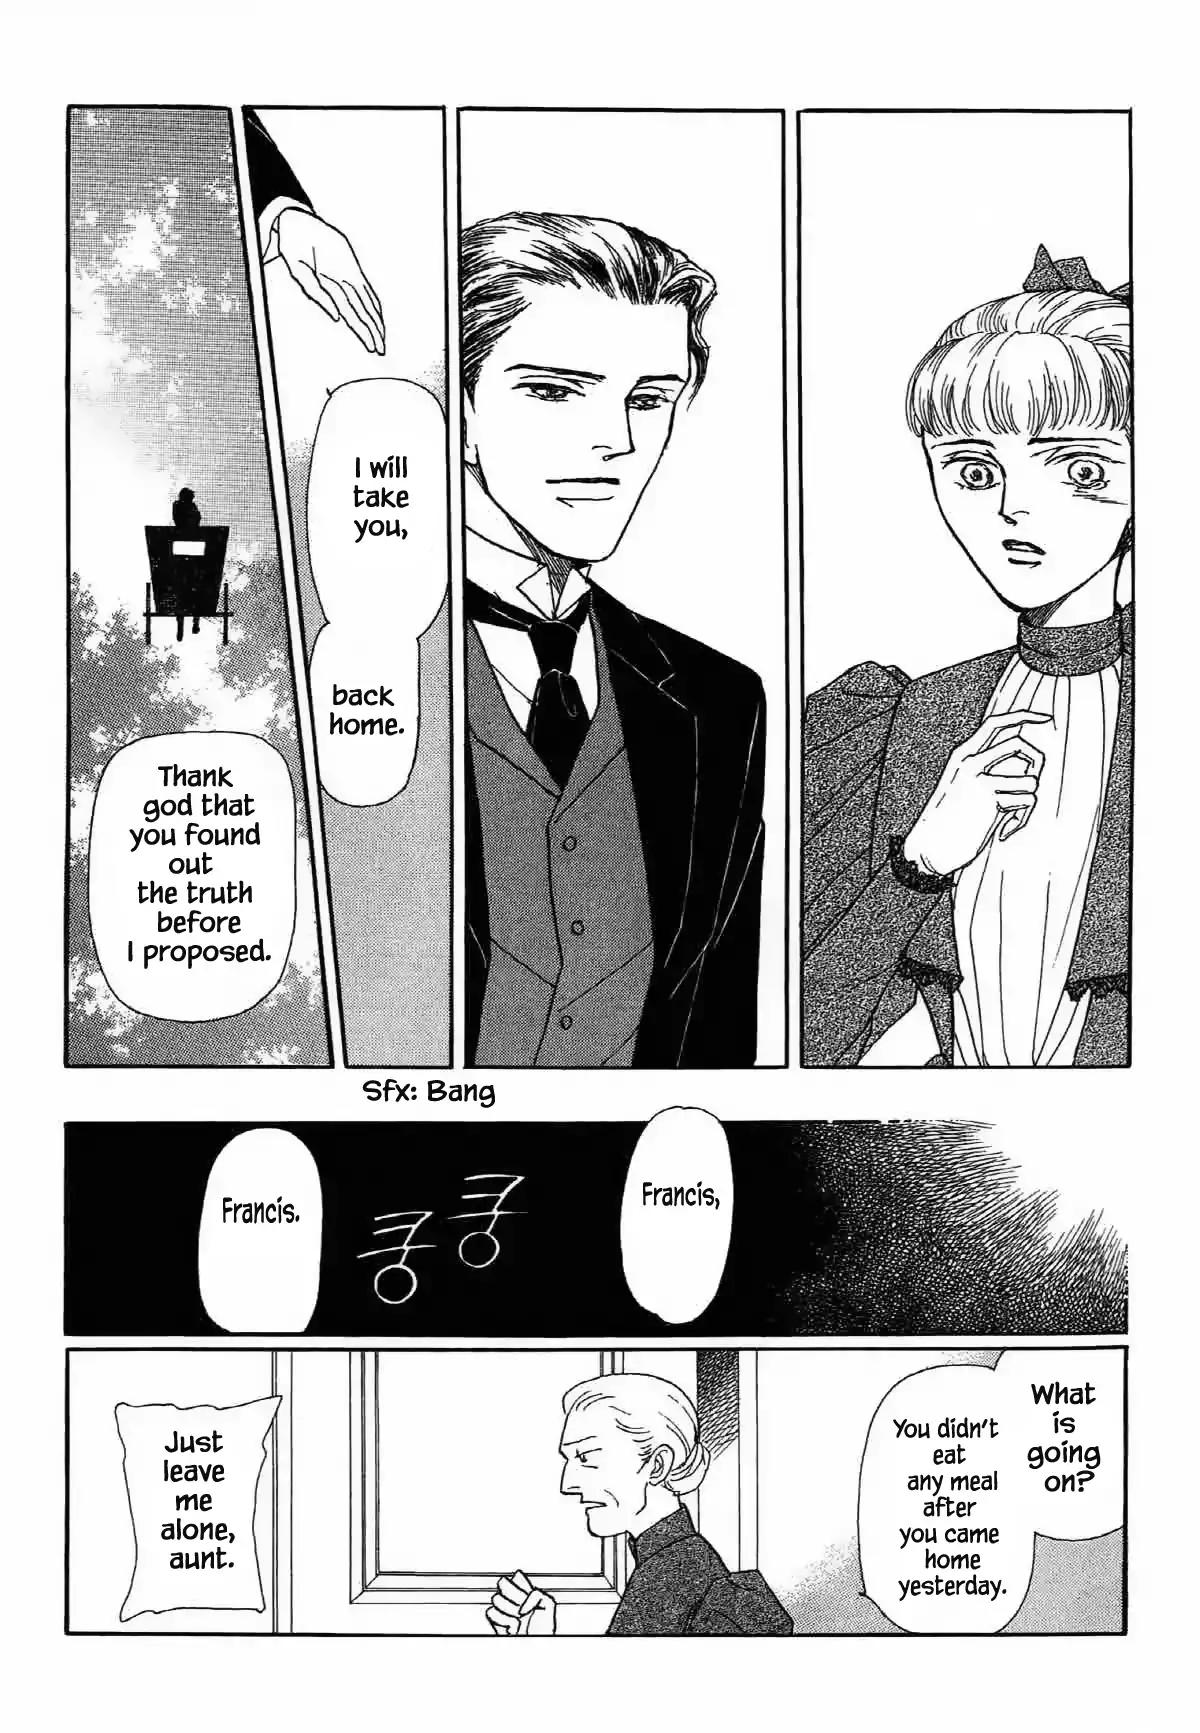 Beautiful England Series Vol.2 Chapter 8.2